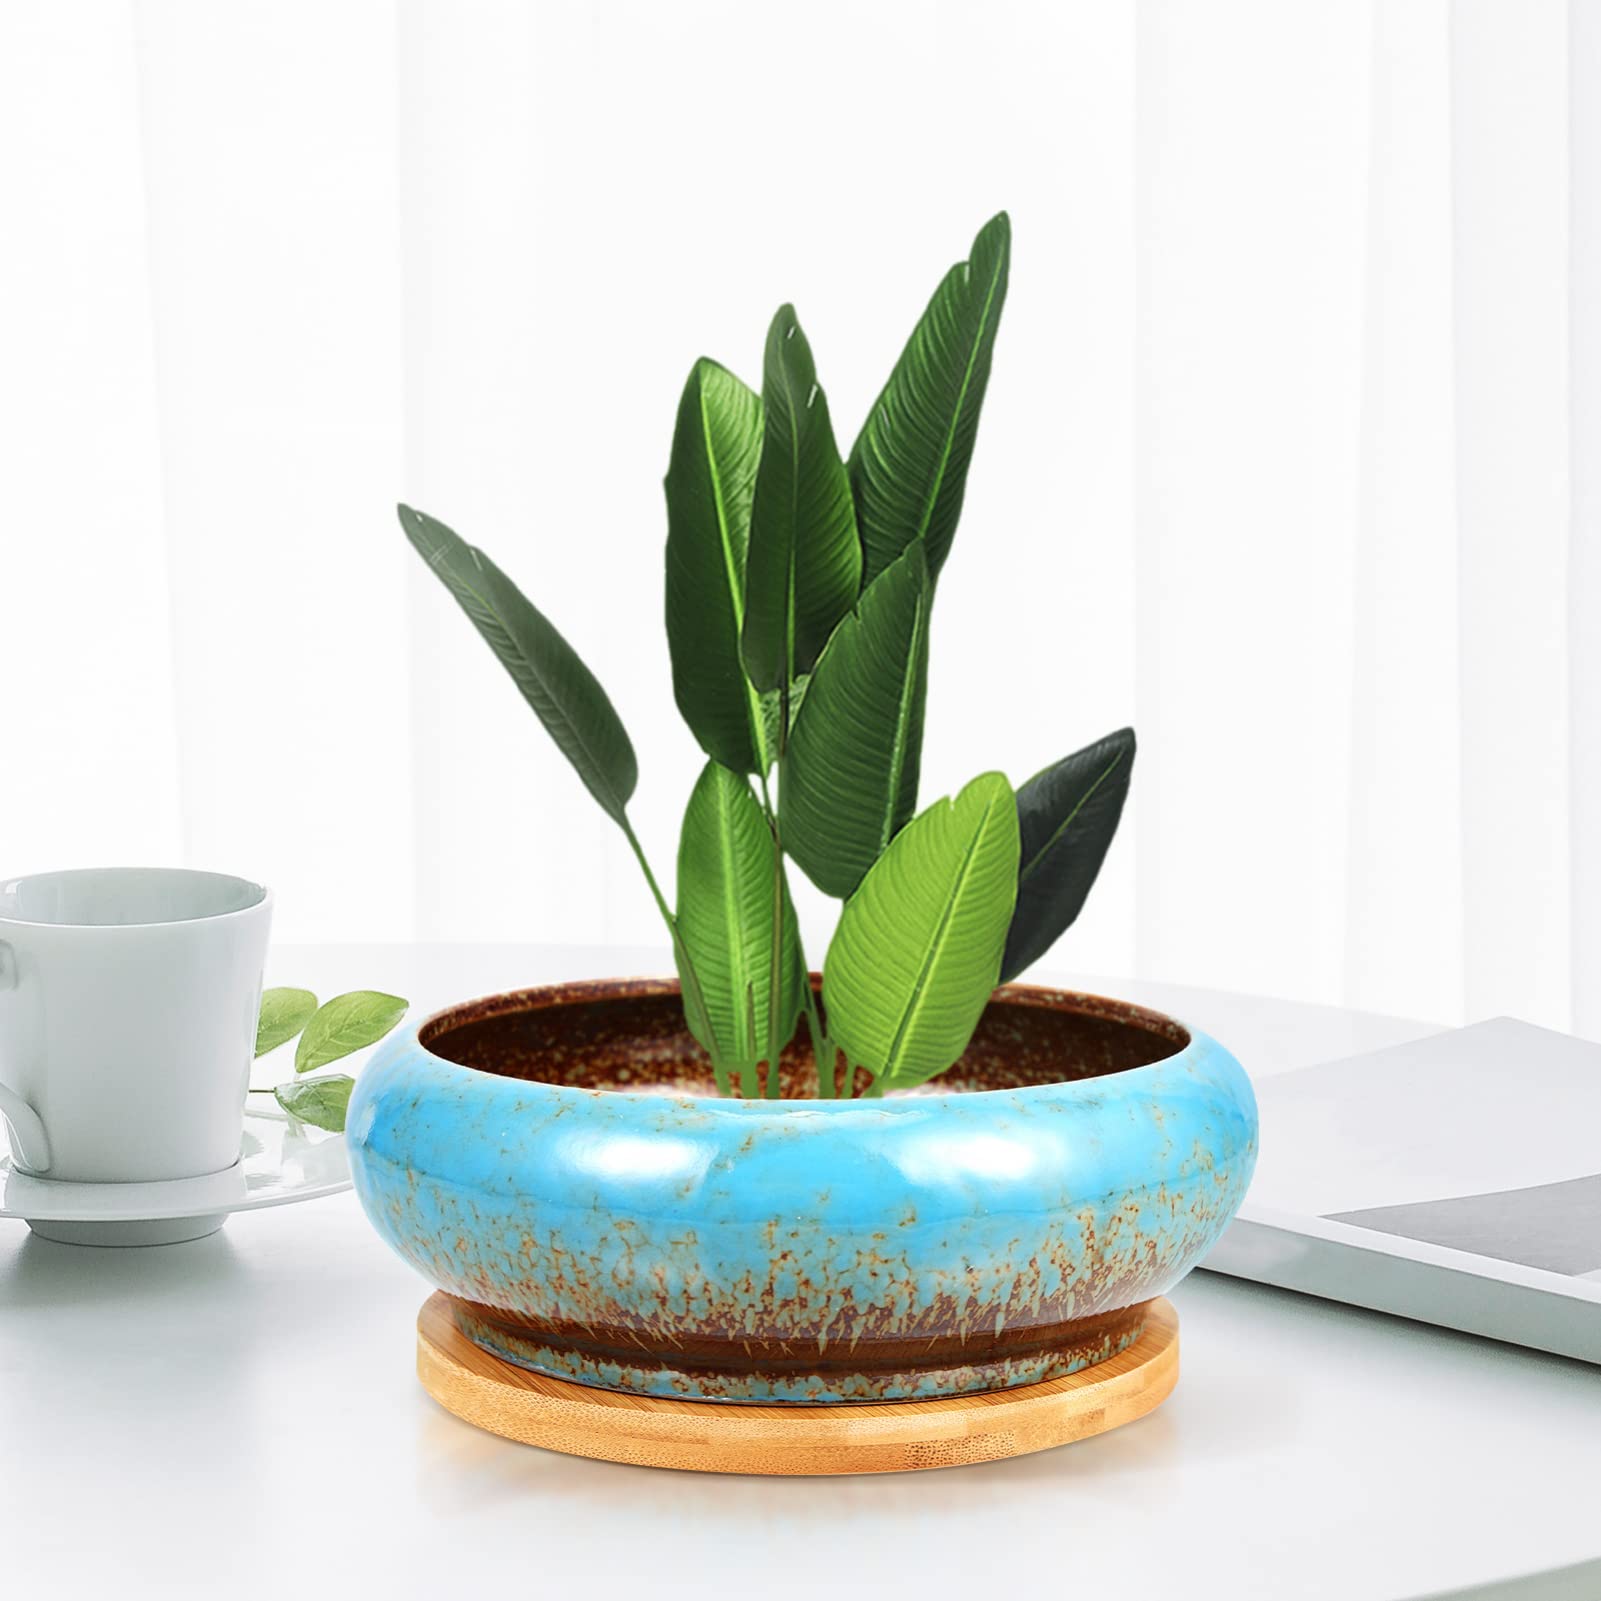 ERINGOGO 7 inches Succulent Pots, Ceramic Flower Planter Pot with Drainage and Tray, Round Shallow Bonsai Bowl Drip Planter for Small Indoor Plants